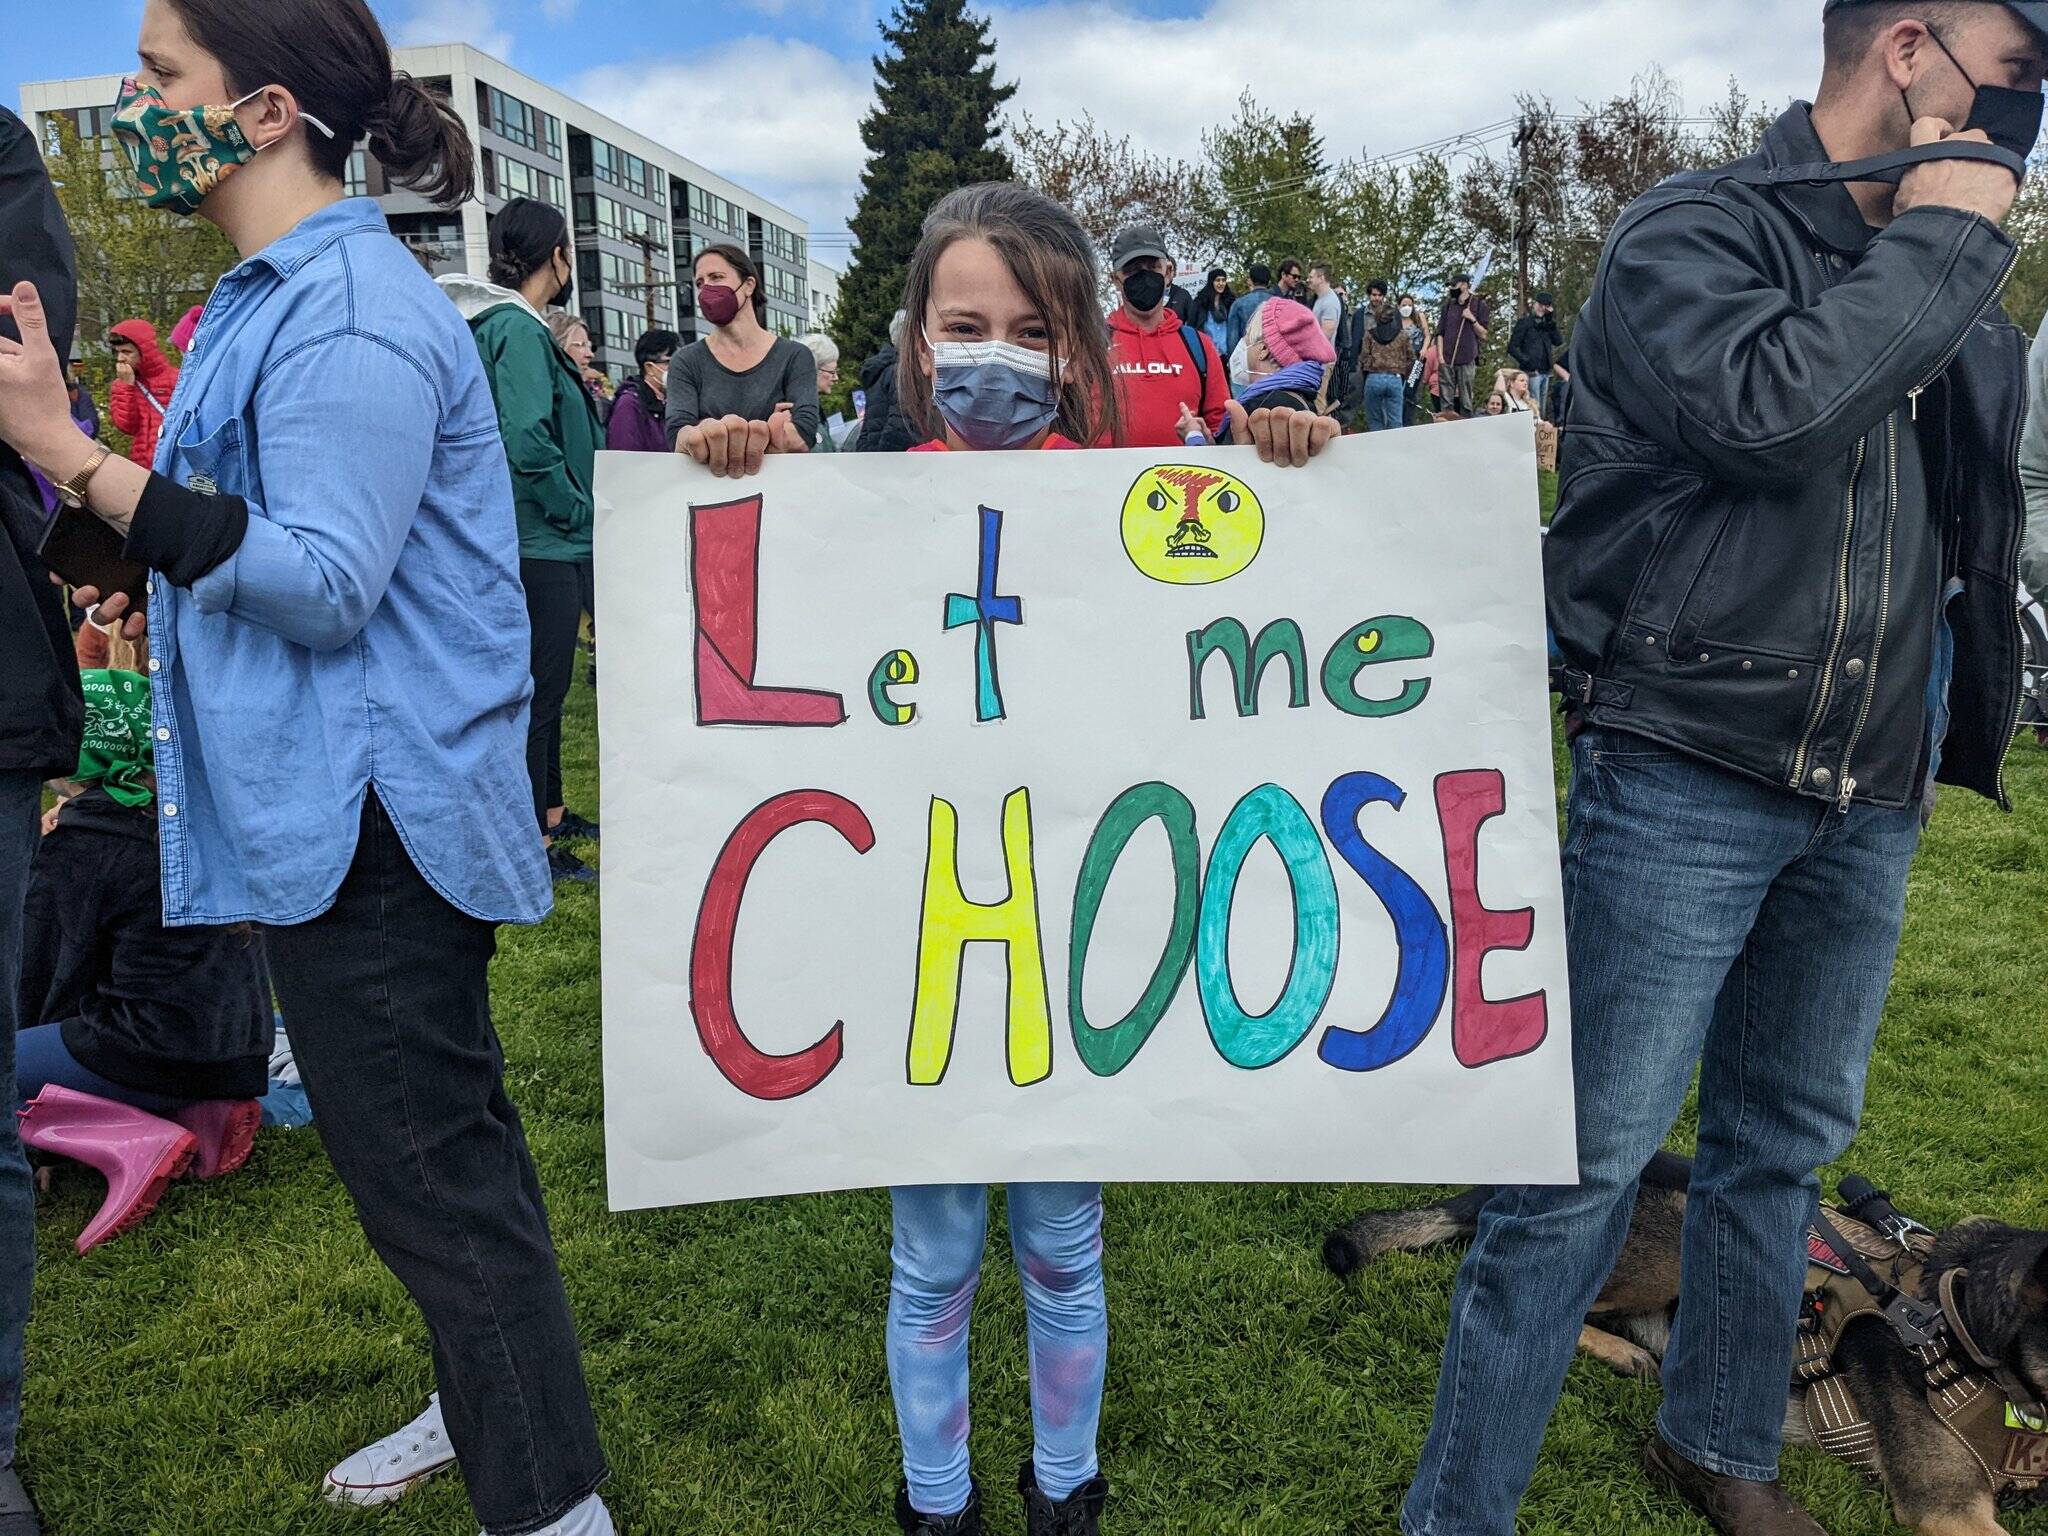 A young girl holds a sign saying “Let me choose” during a reproductive rights protest at Cal Anderson Park on May 14, 2022. Hannah Saunders/Sound Publishing